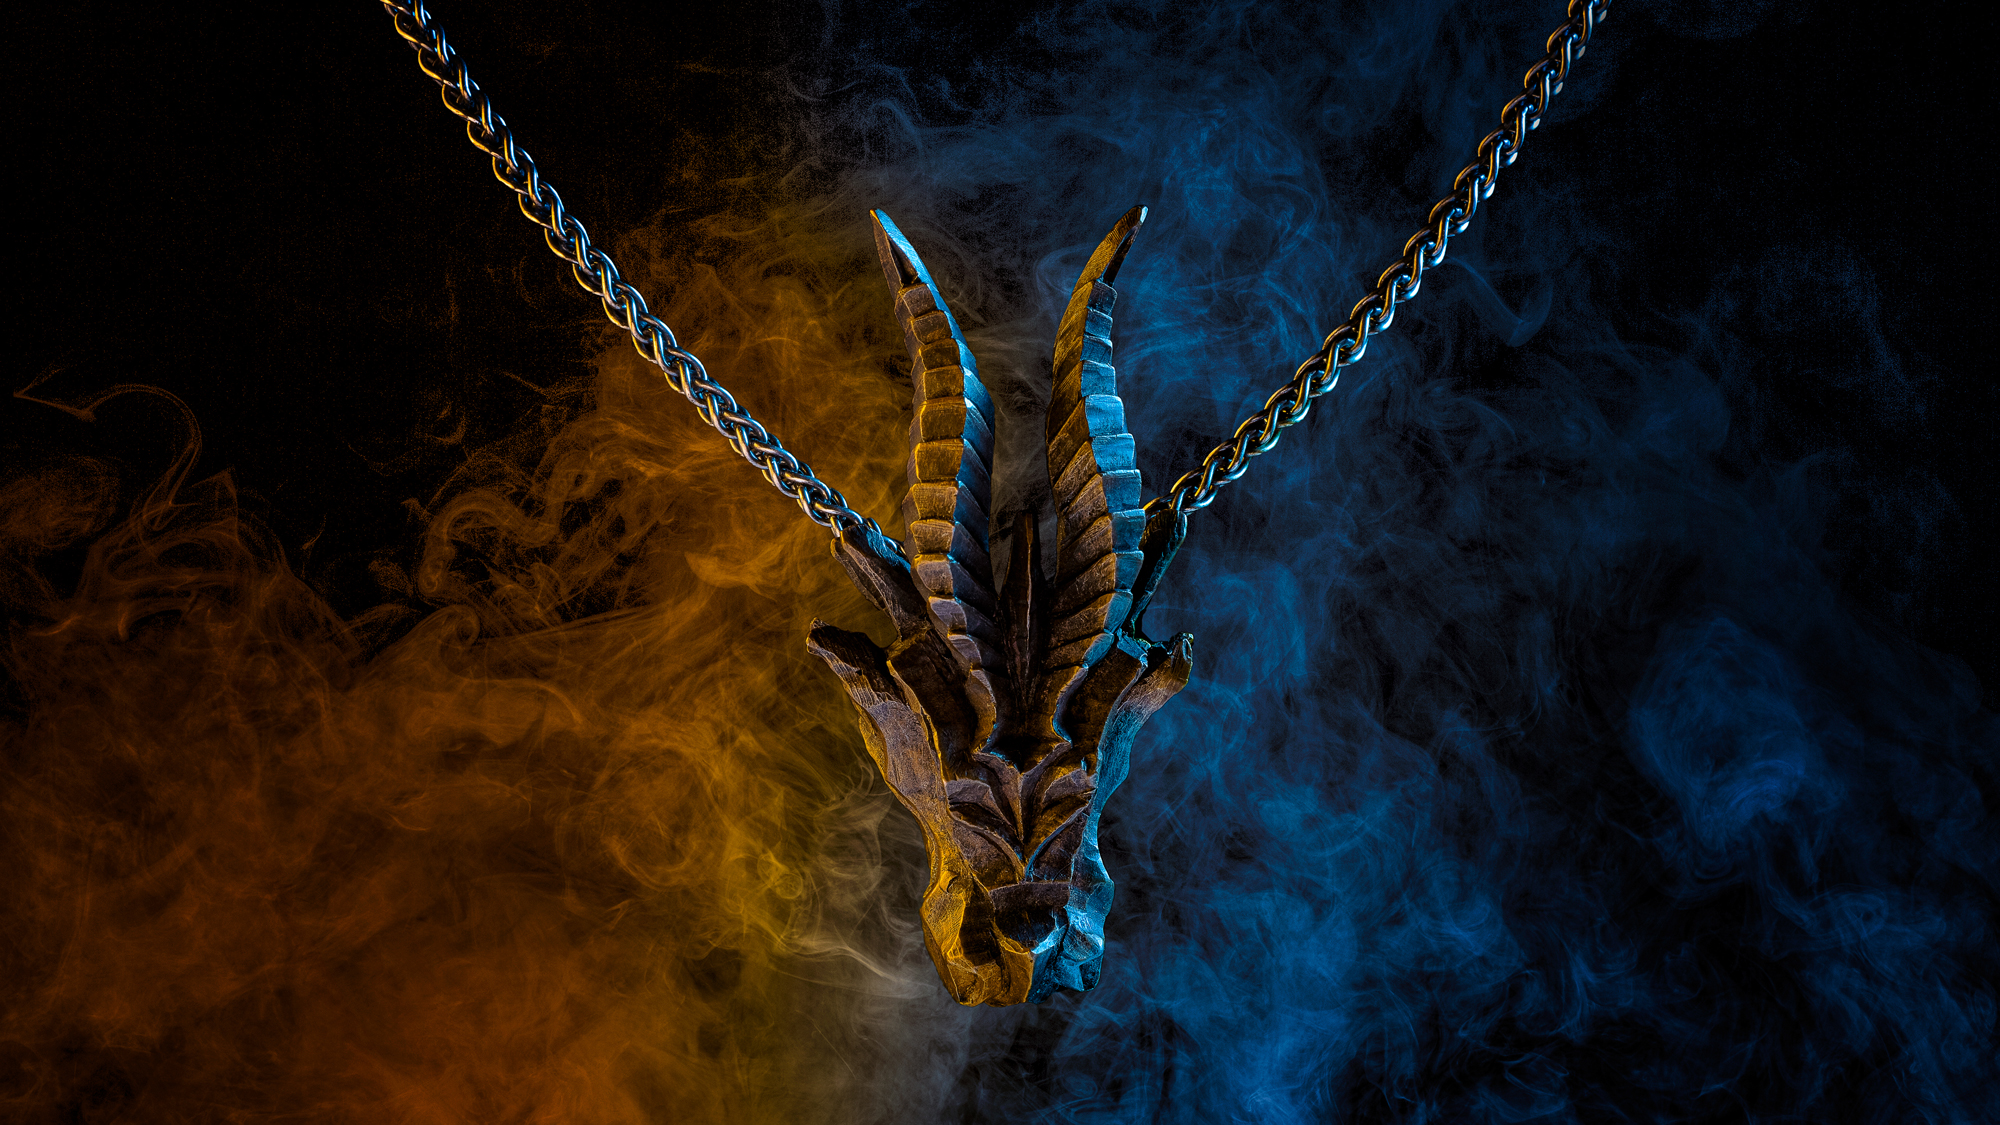 Wenbo Zhao-Creative Jewellery Photography with Object Maker-Bronze Dragon Necklace with yellow and blue smokey lights